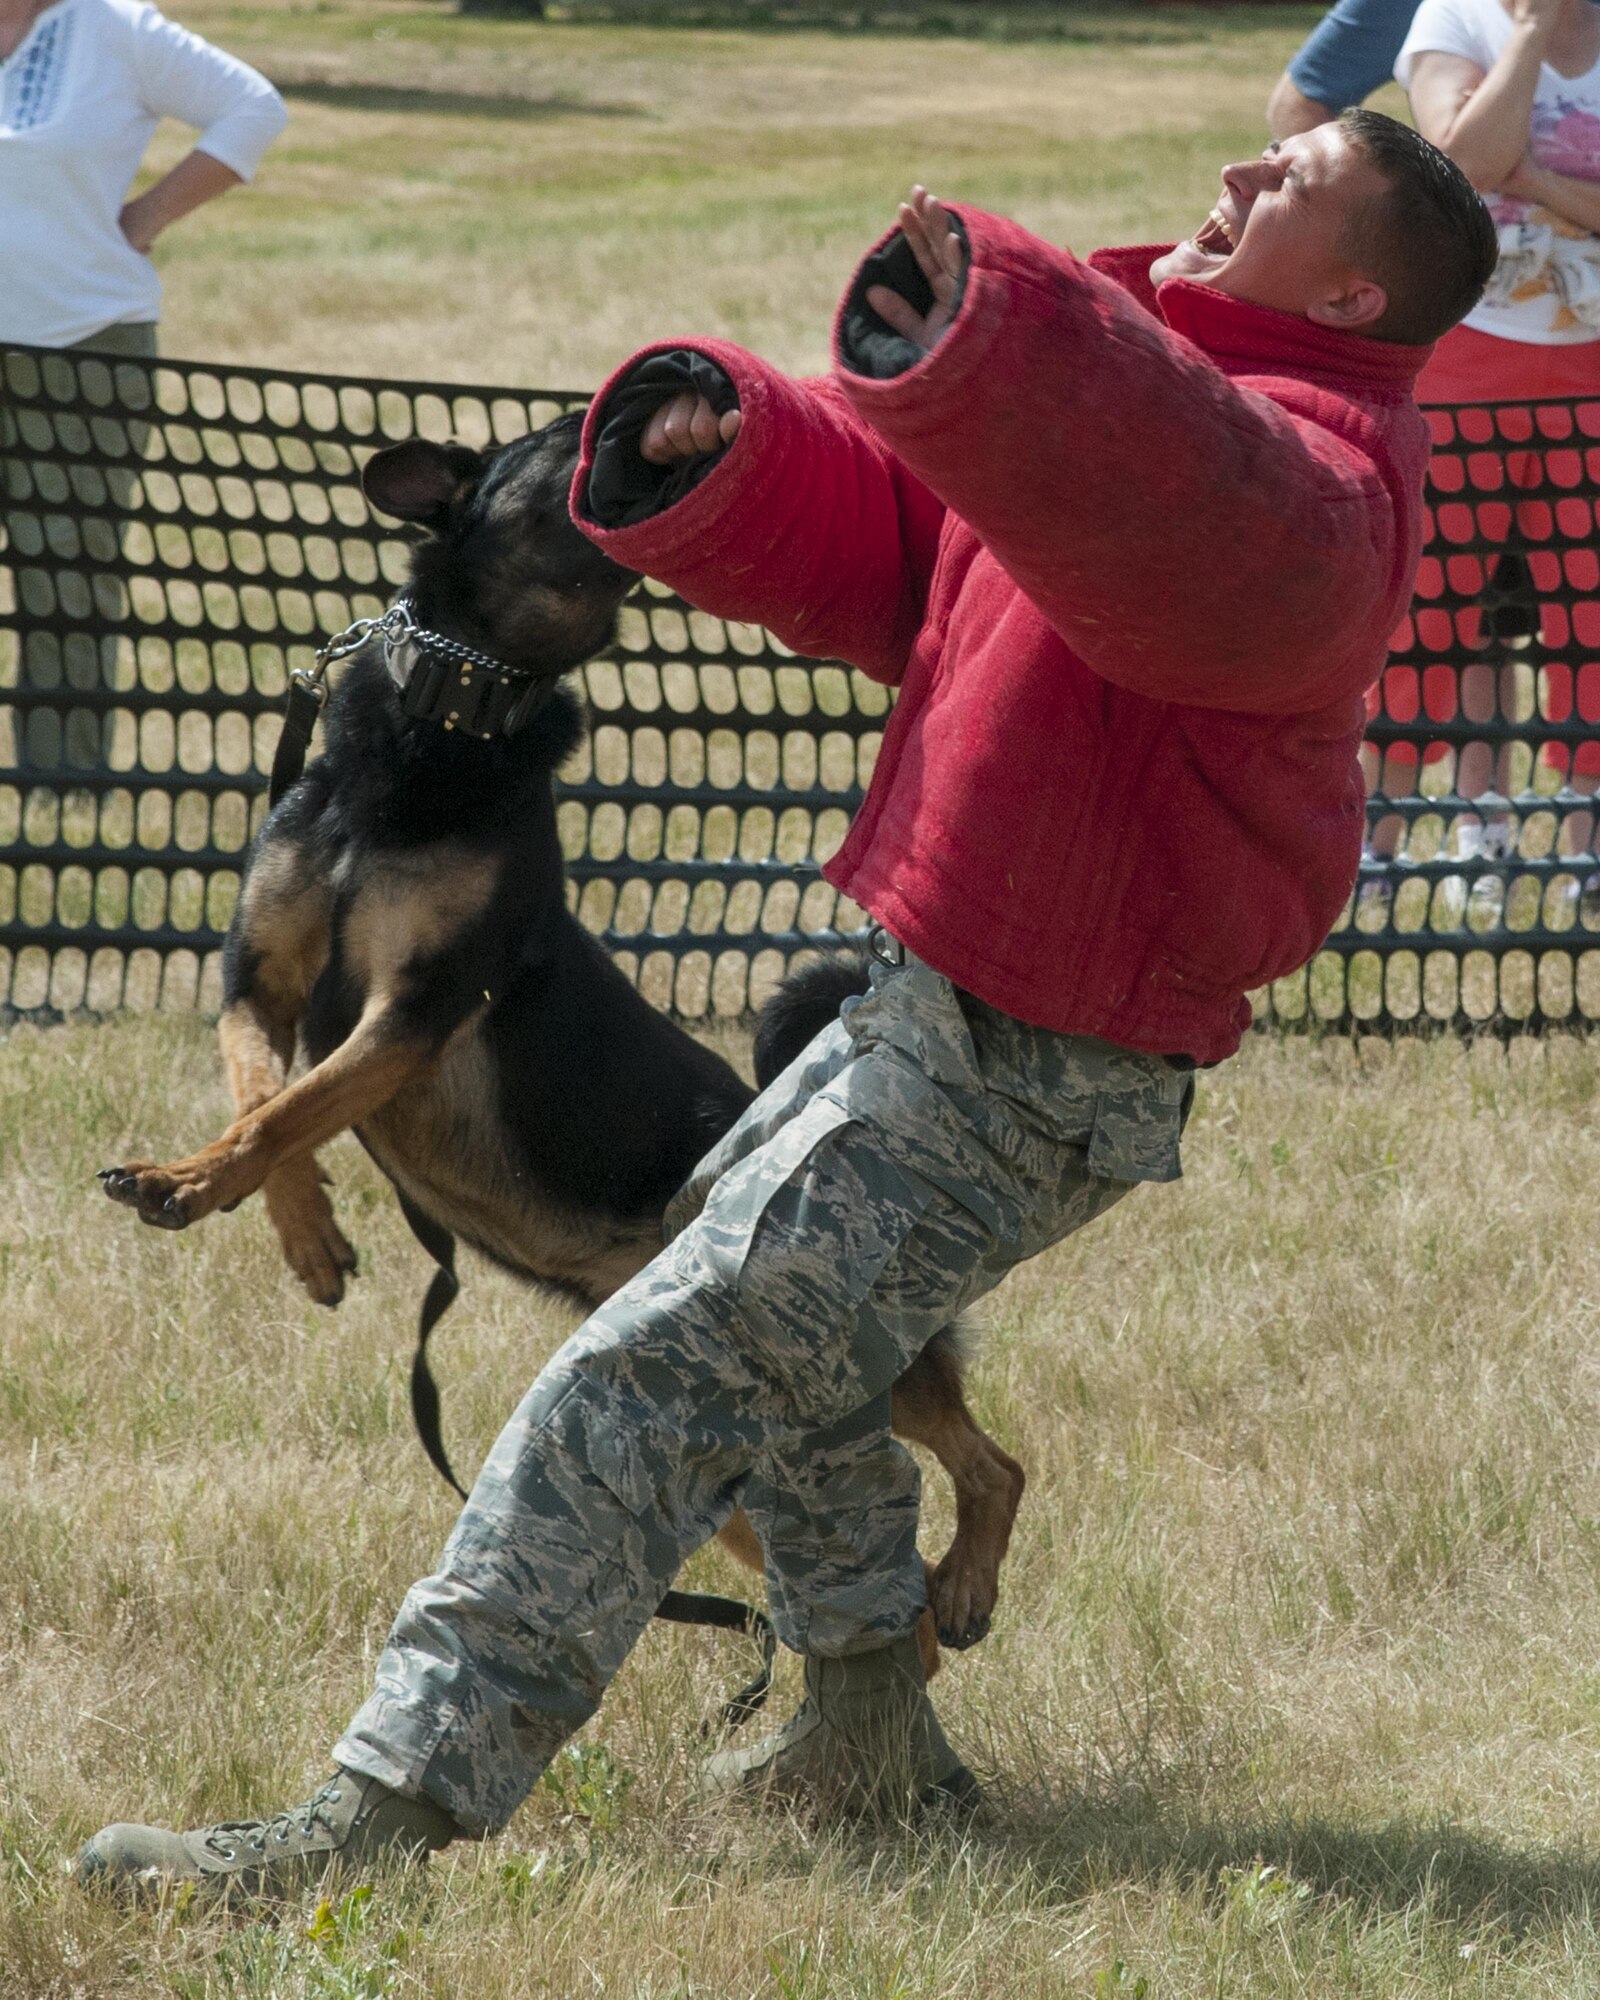 Staff Sgt. Bryan Gill, 90th Security Forces Squadron military working dog trainer, is attacked by MWD Eby, demonstrating the dog's capabilities July 22, 2016, during Fort D.A. Russell Days, the annual F.E. Warren Air Force Base, Wyo., open house. MWDs play an important role in securing the base. (U.S. Air Force photo by Senior Airman Jason Wiese)